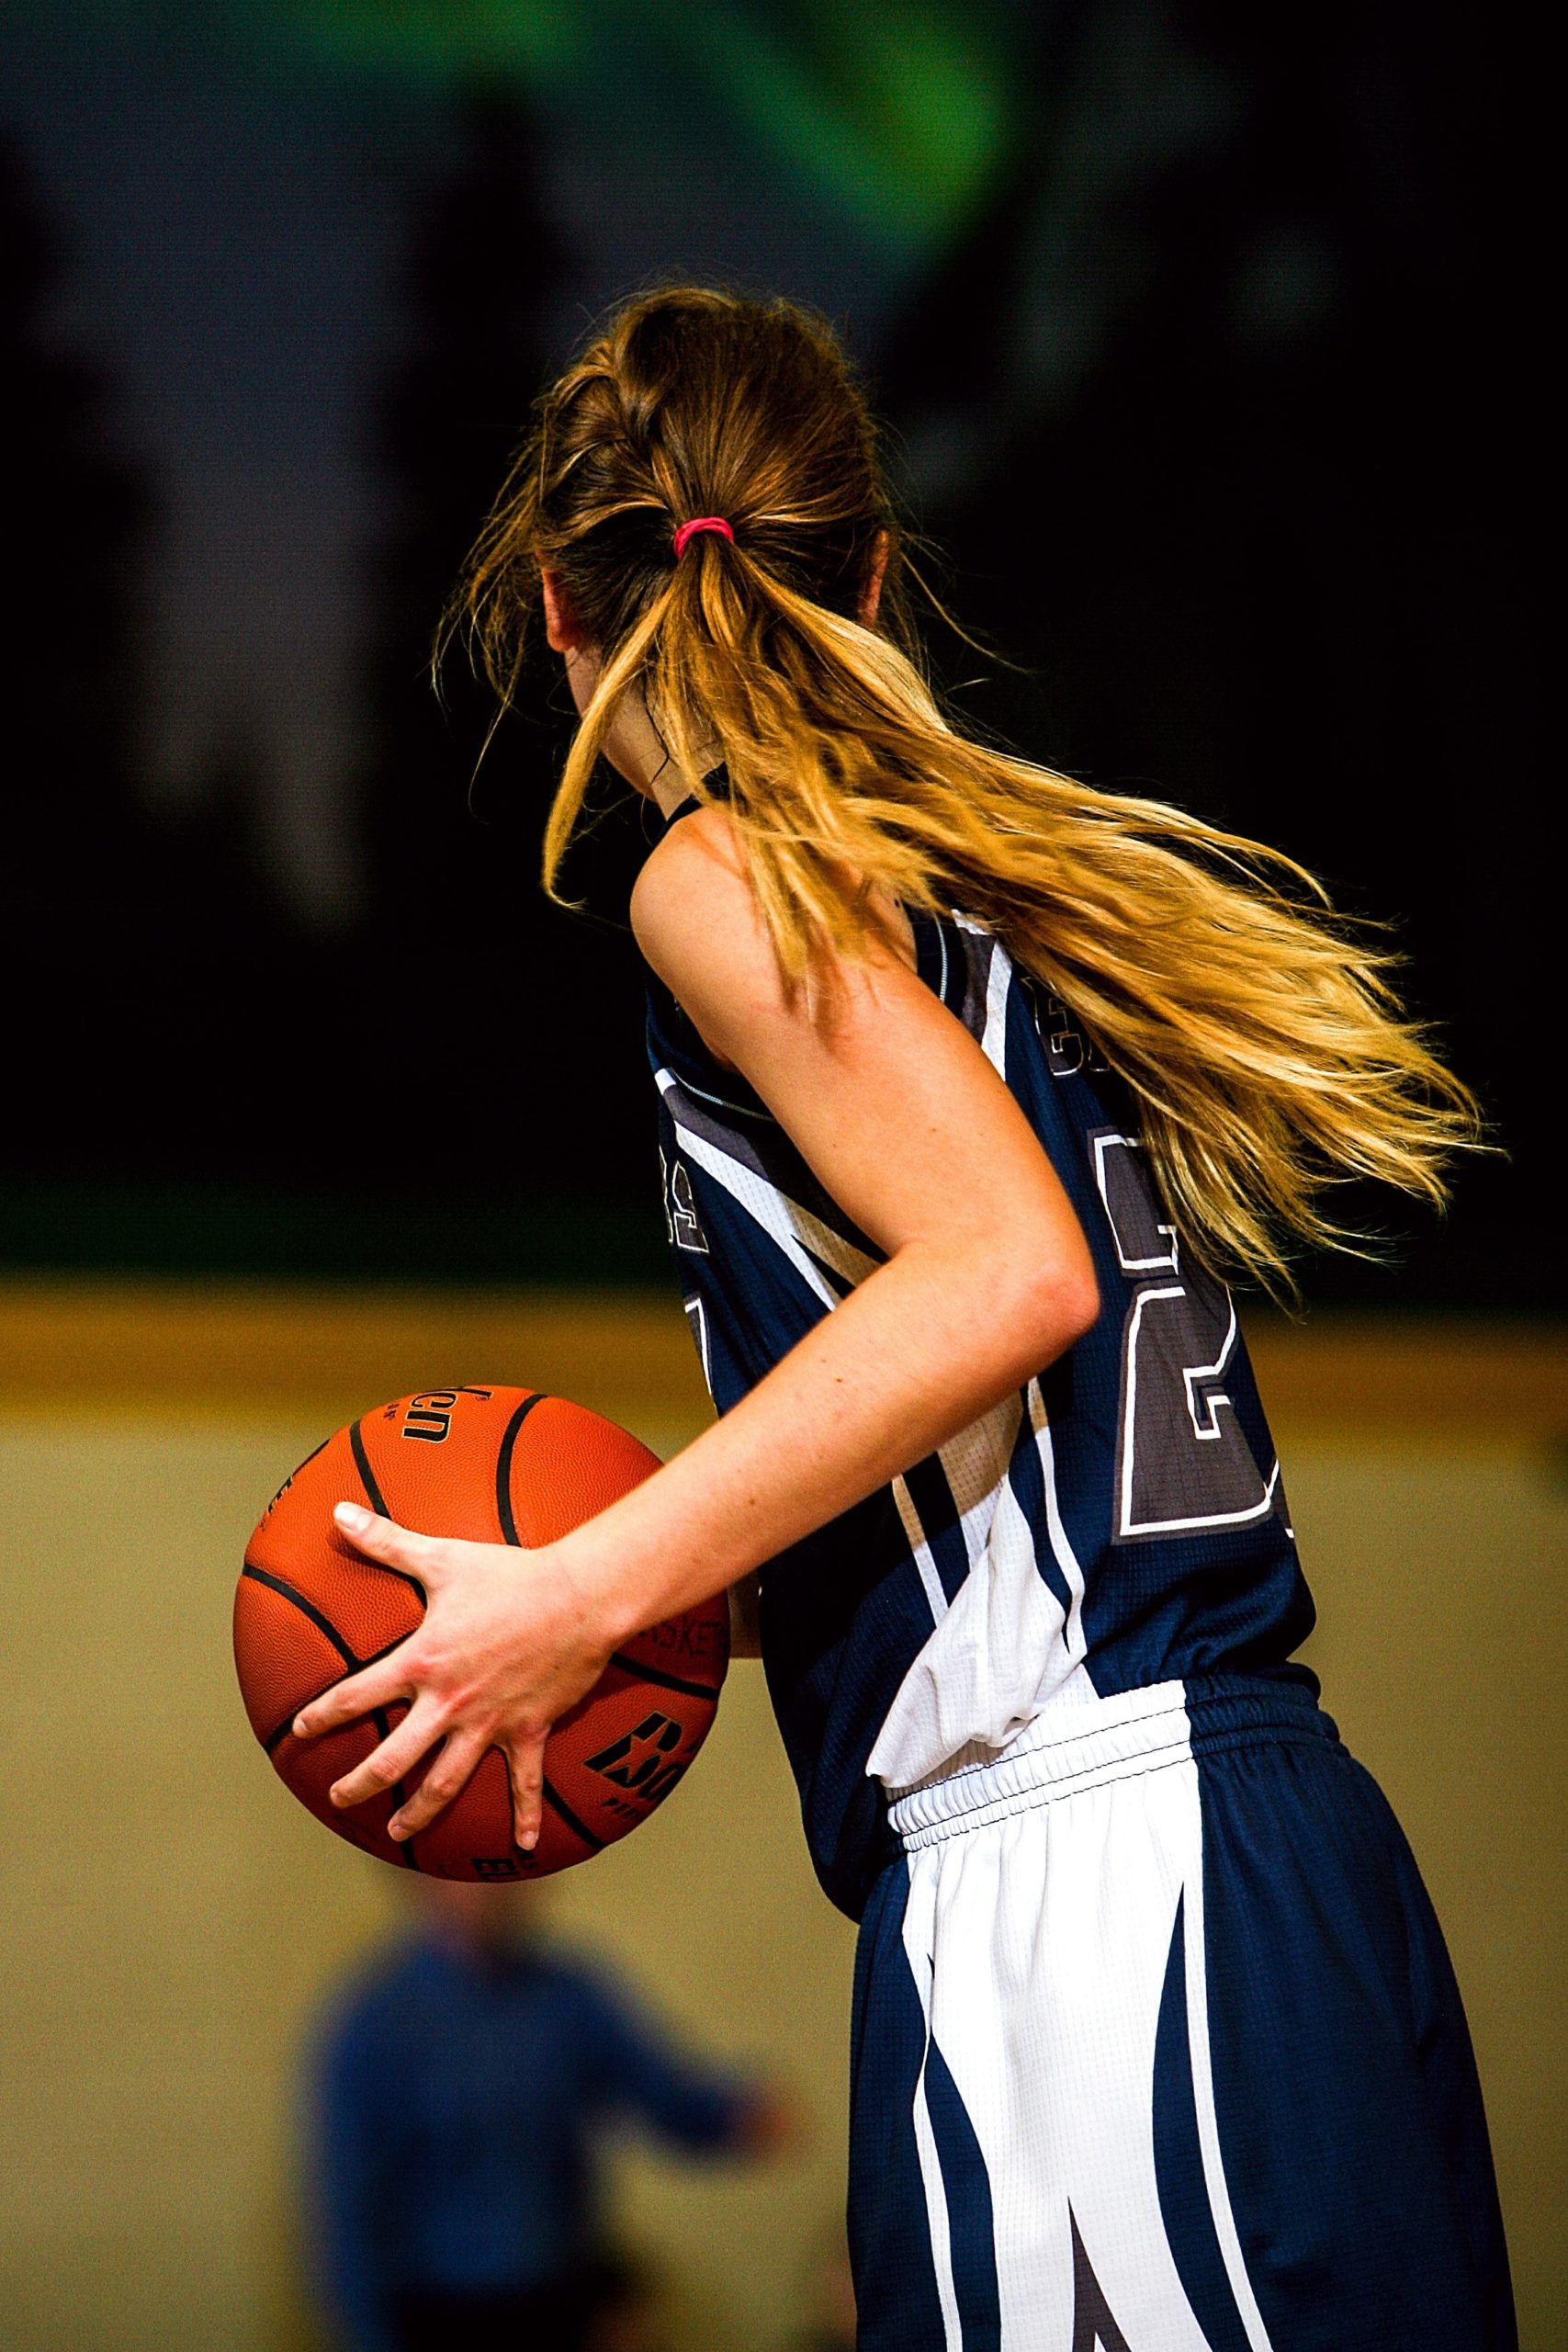 woman-in-blue-and-white-basketball-jersey-holding-brown-159607